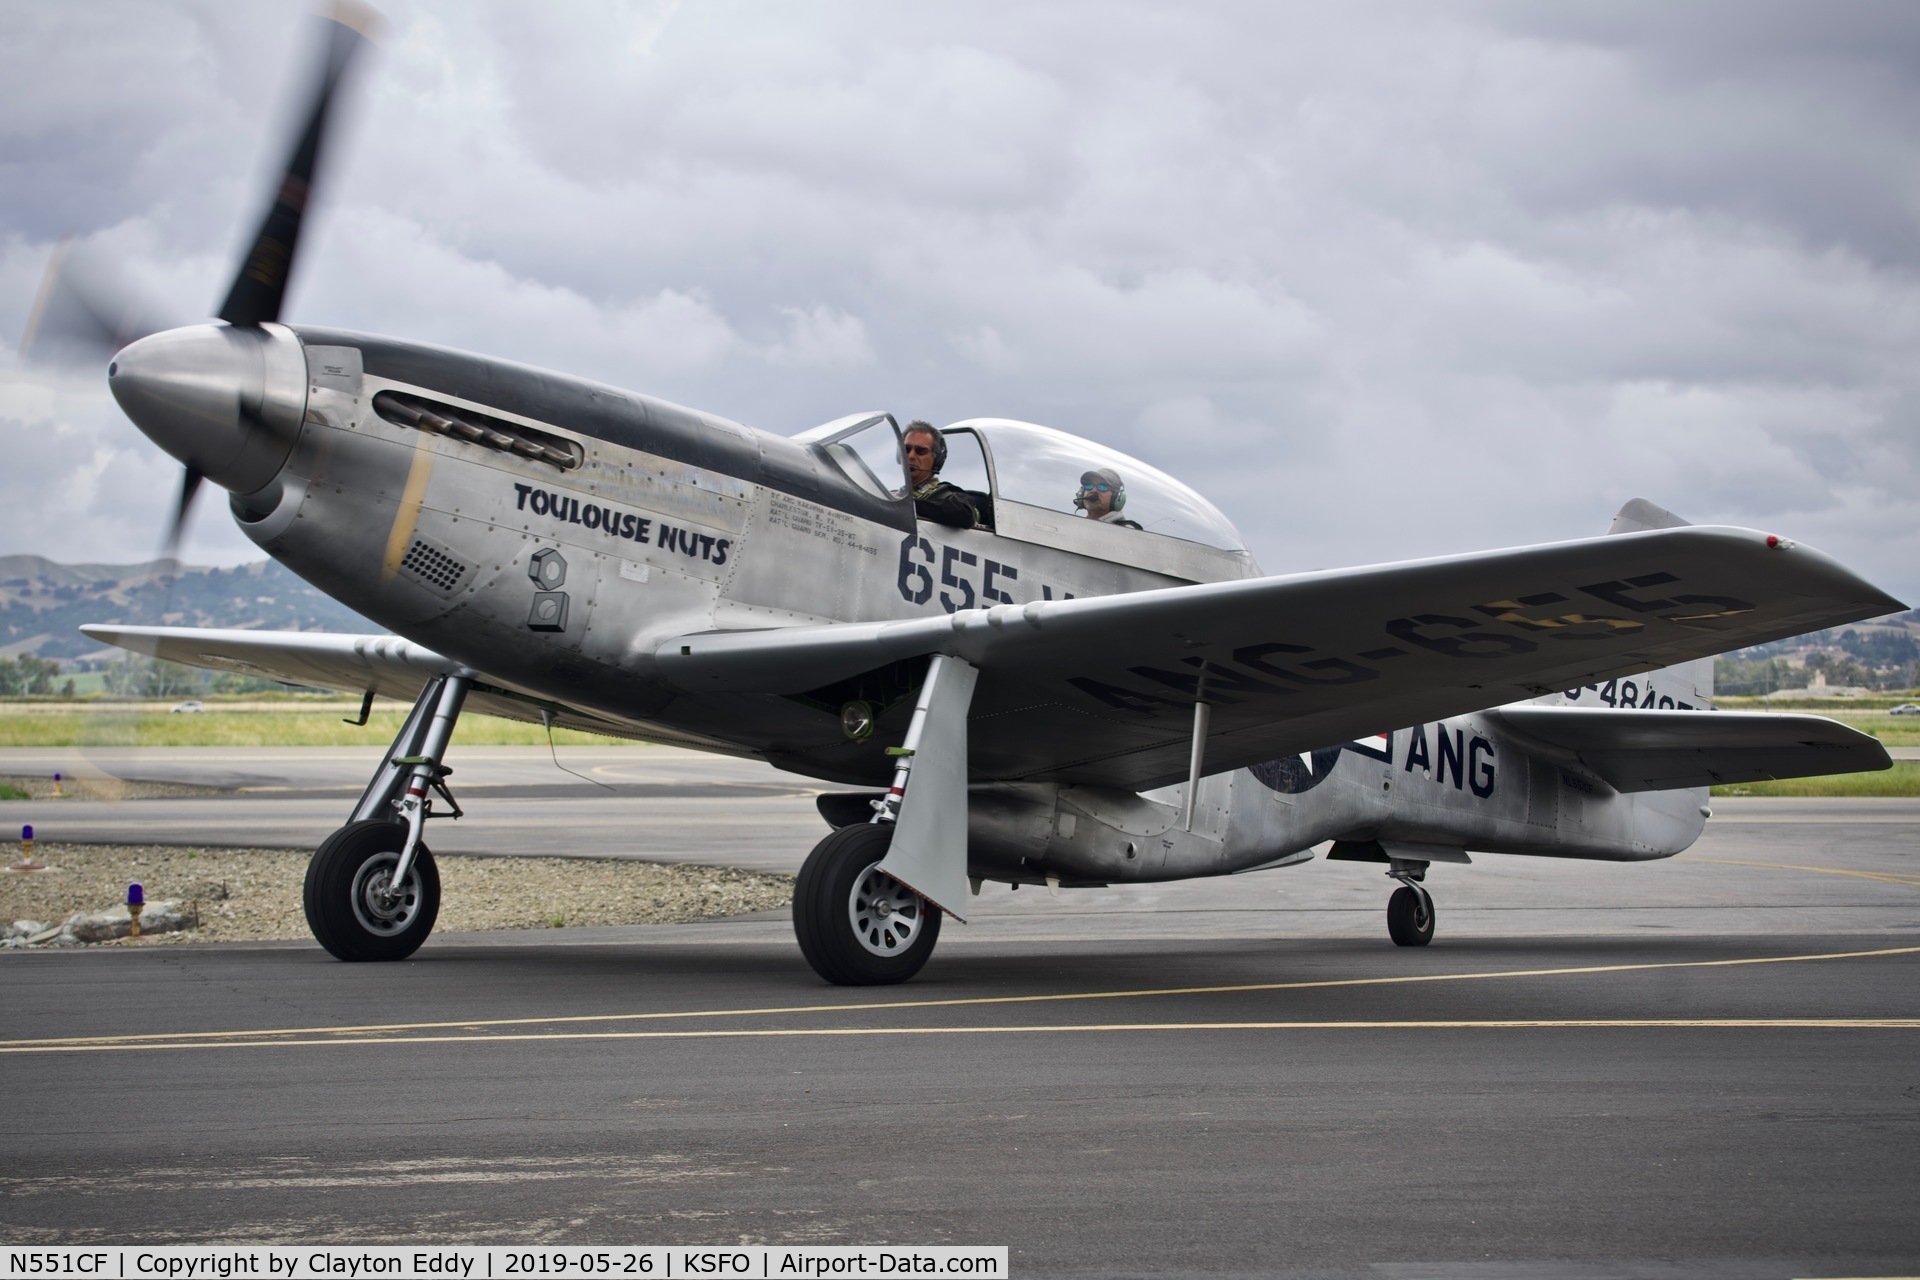 N551CF, 1944 North American TF-51D Mustang C/N 122-44511, Livermore Airport California 2019.